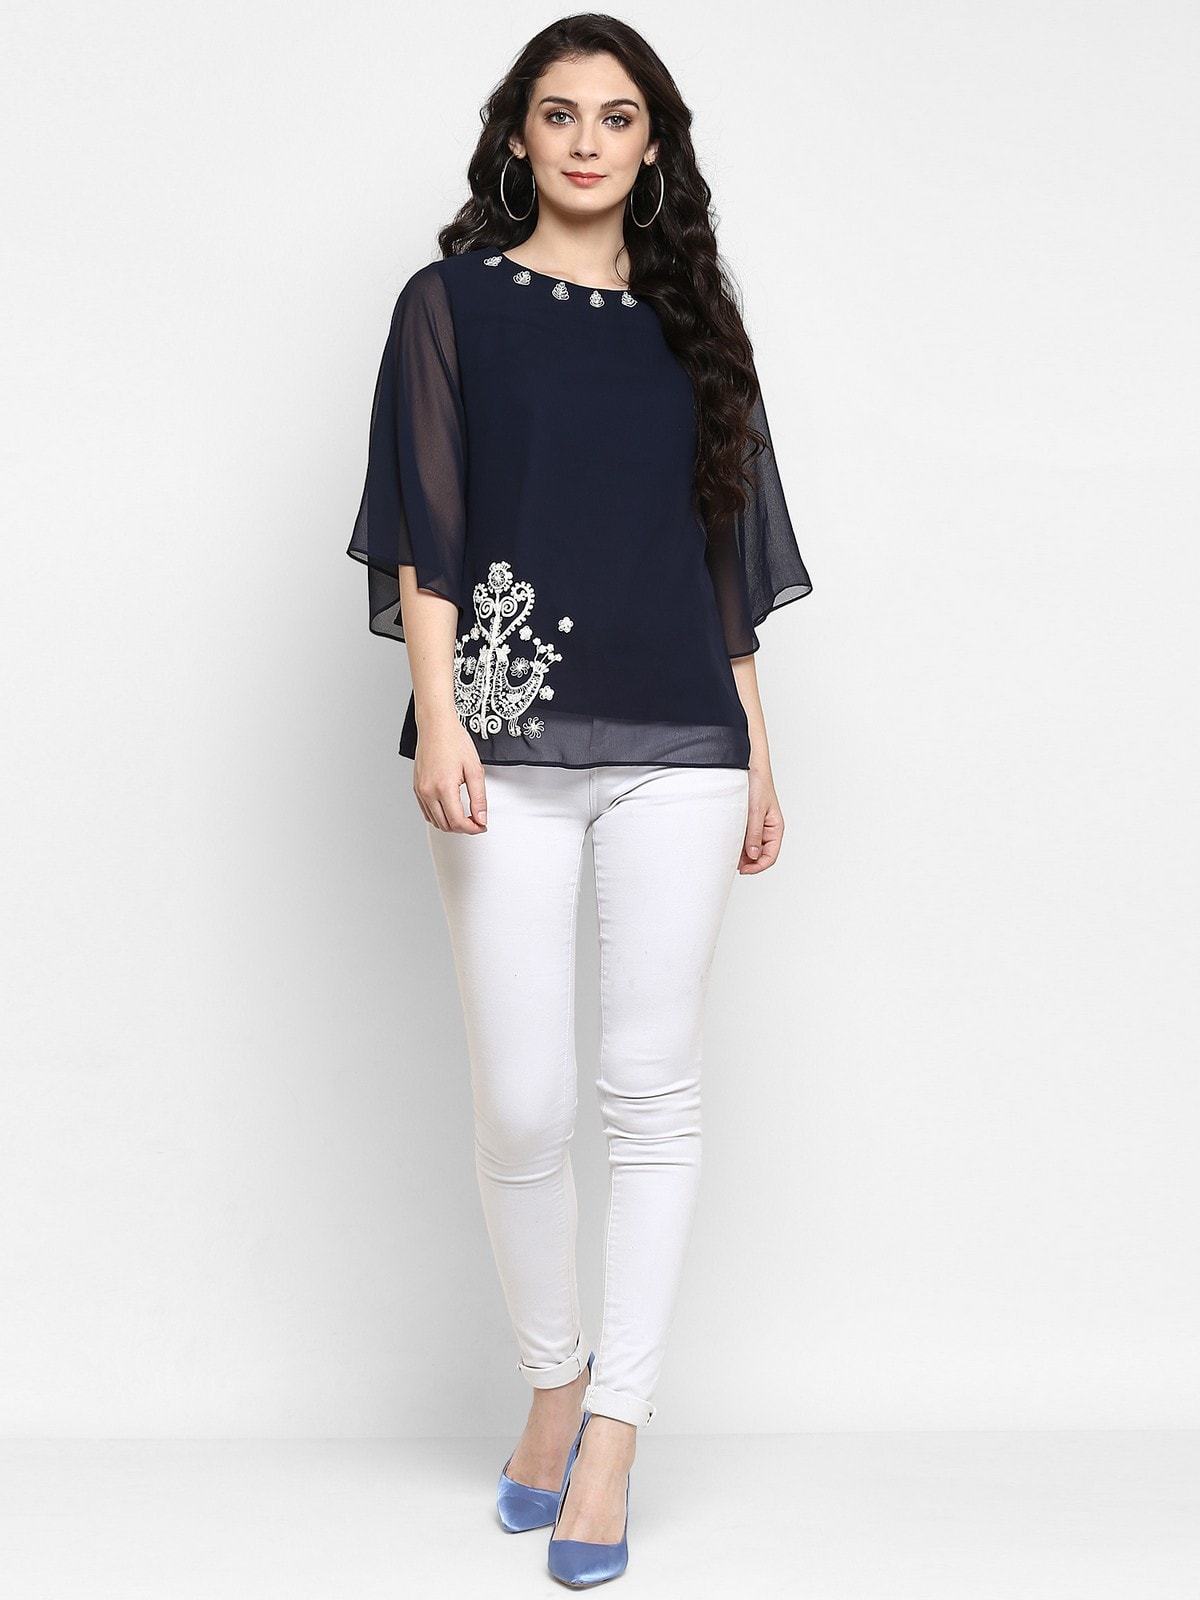 Women's Navy Blue Embroidered Sheer Top - Pannkh